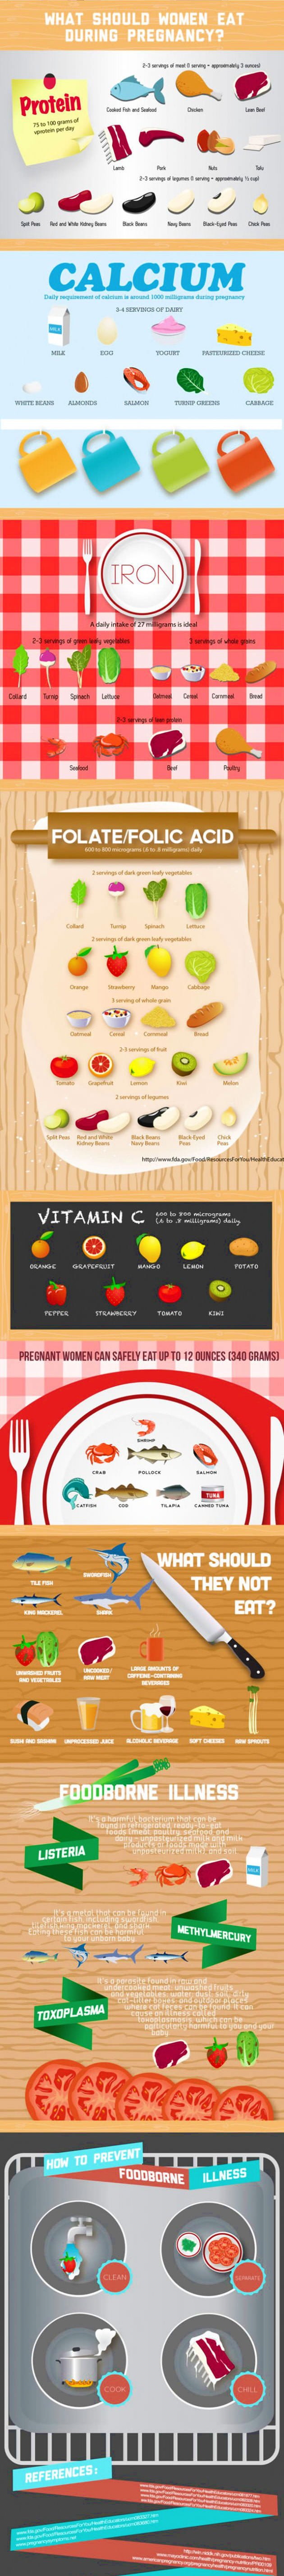 What To Eat During Pregnancy Infographic